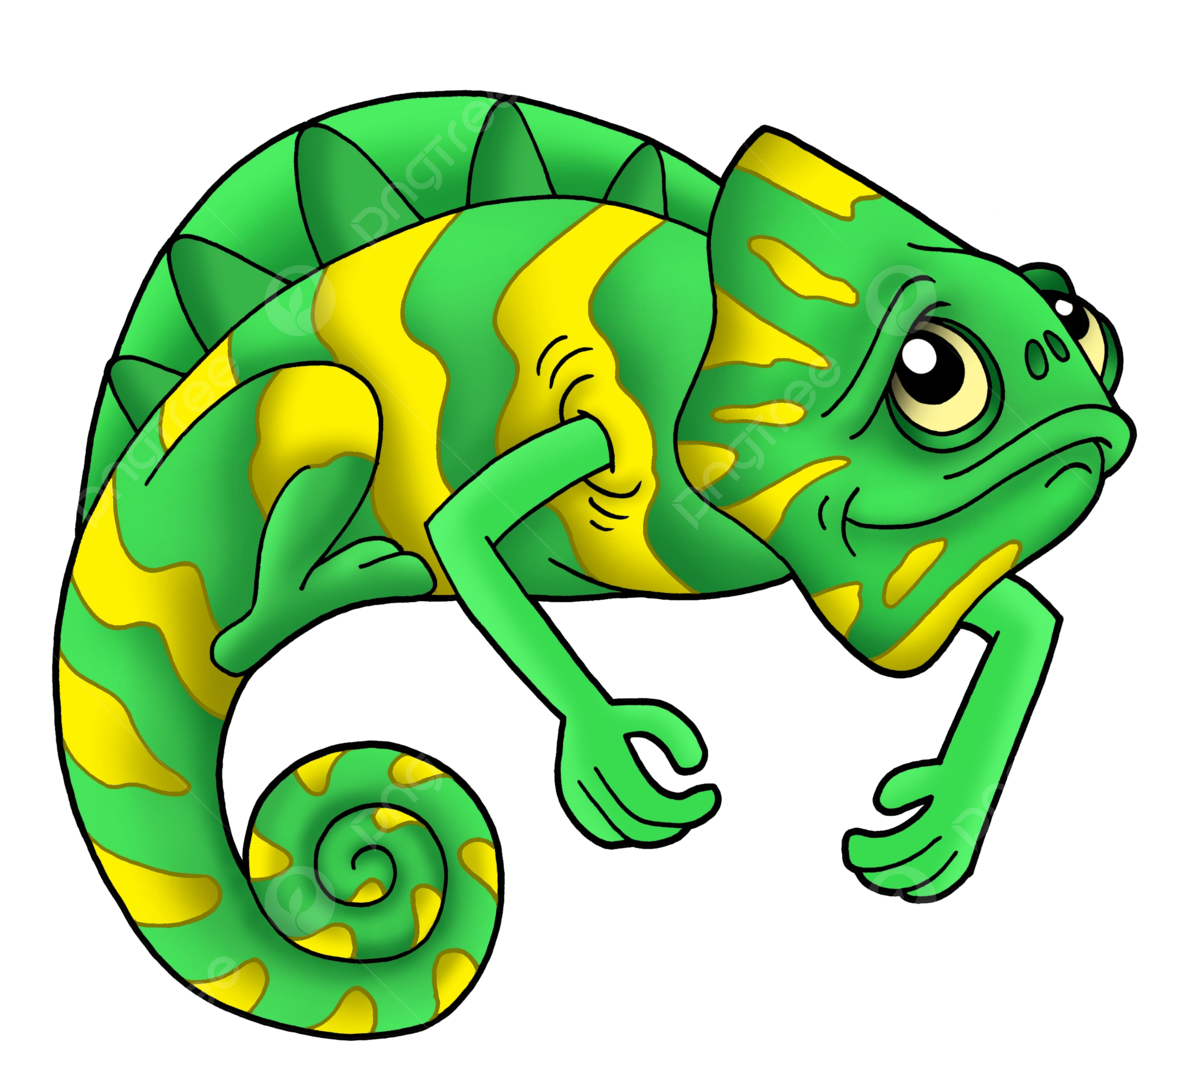 How to draw a chameleon png transparent images free download vector files